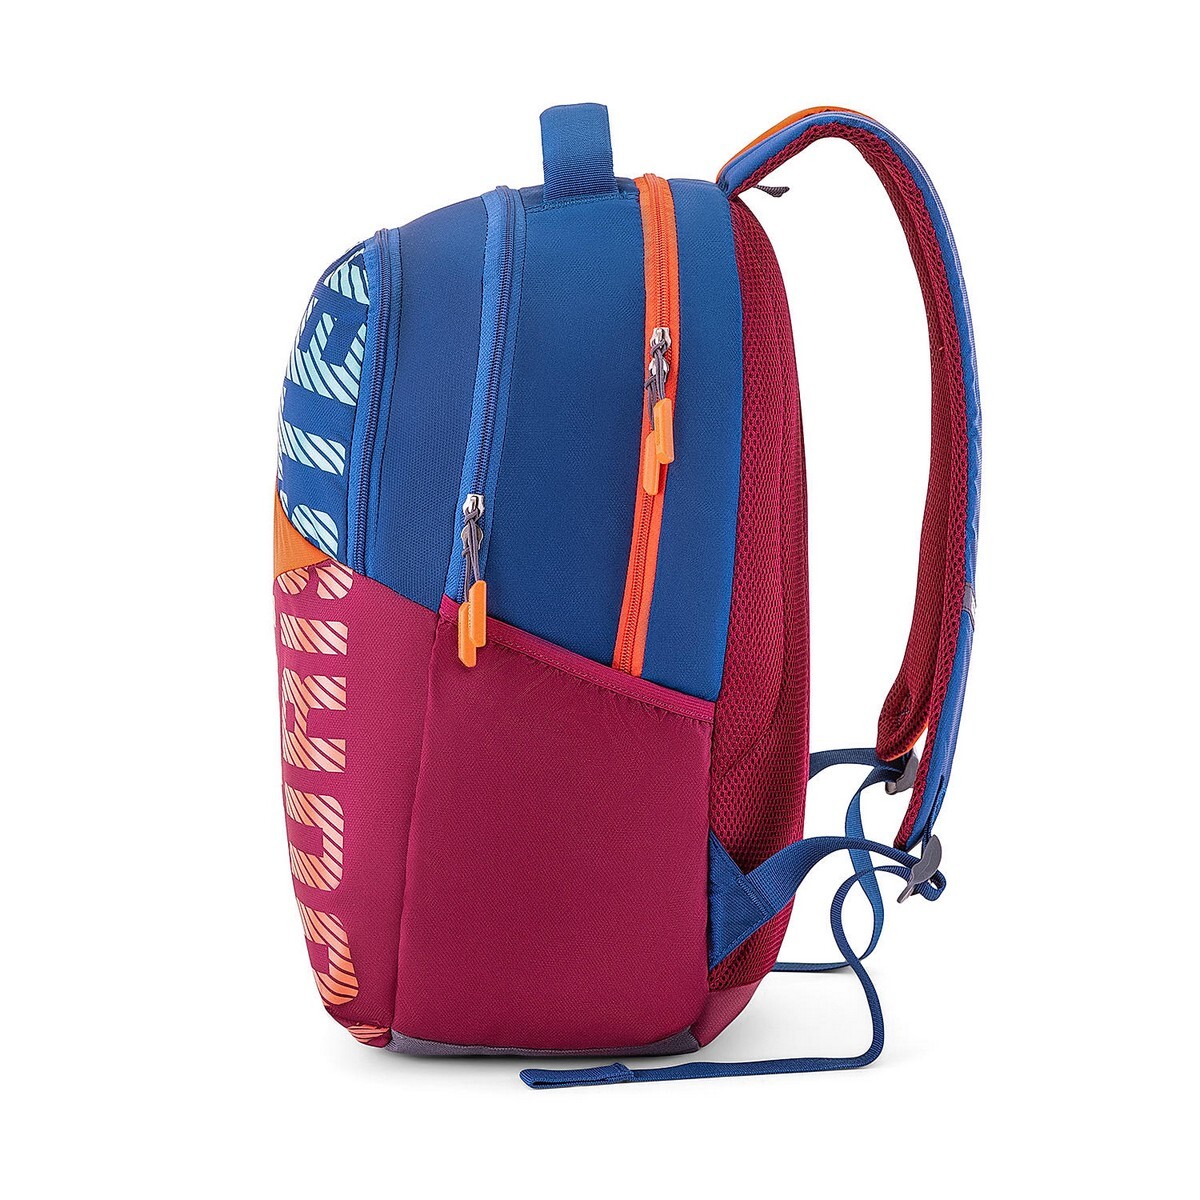 American Tourister Backpack Sest+ Bp01 Blue/Red